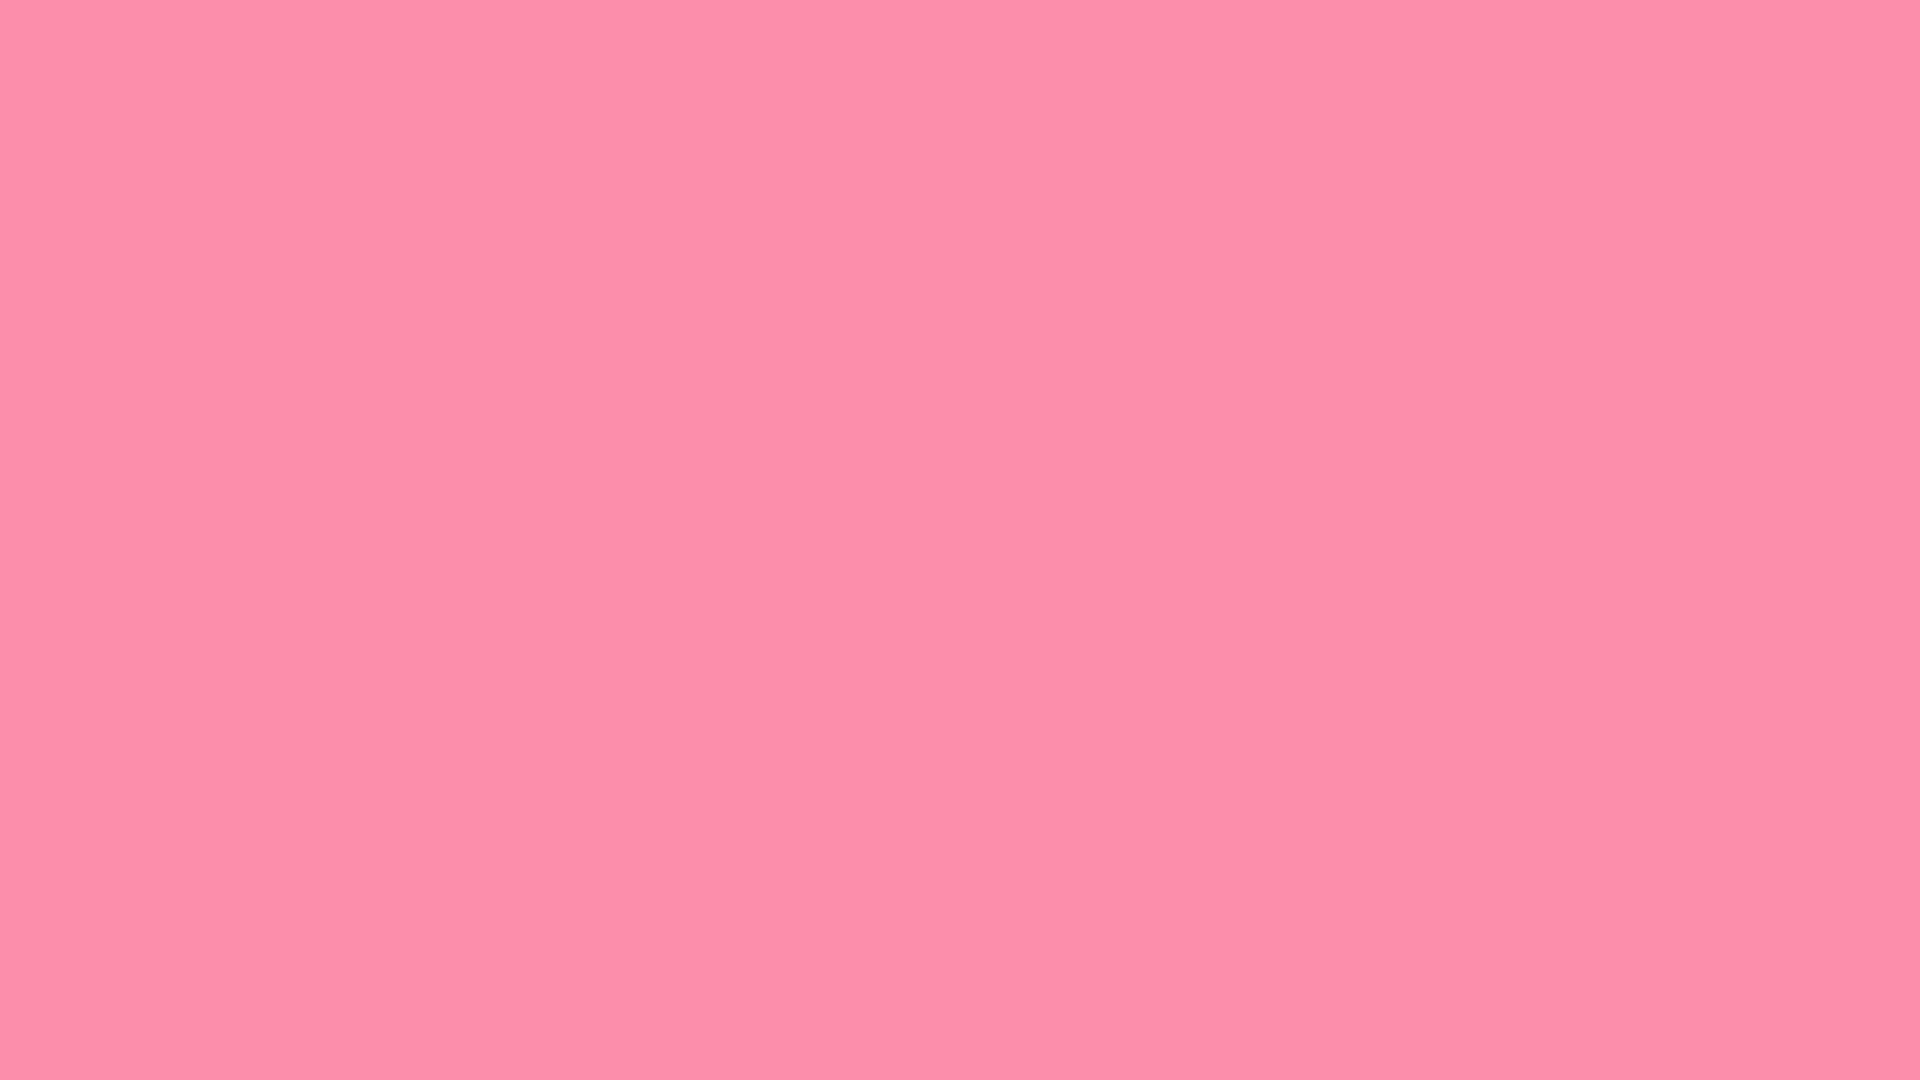 Flamingo Pink, High Definition, High Quality, Widescreen